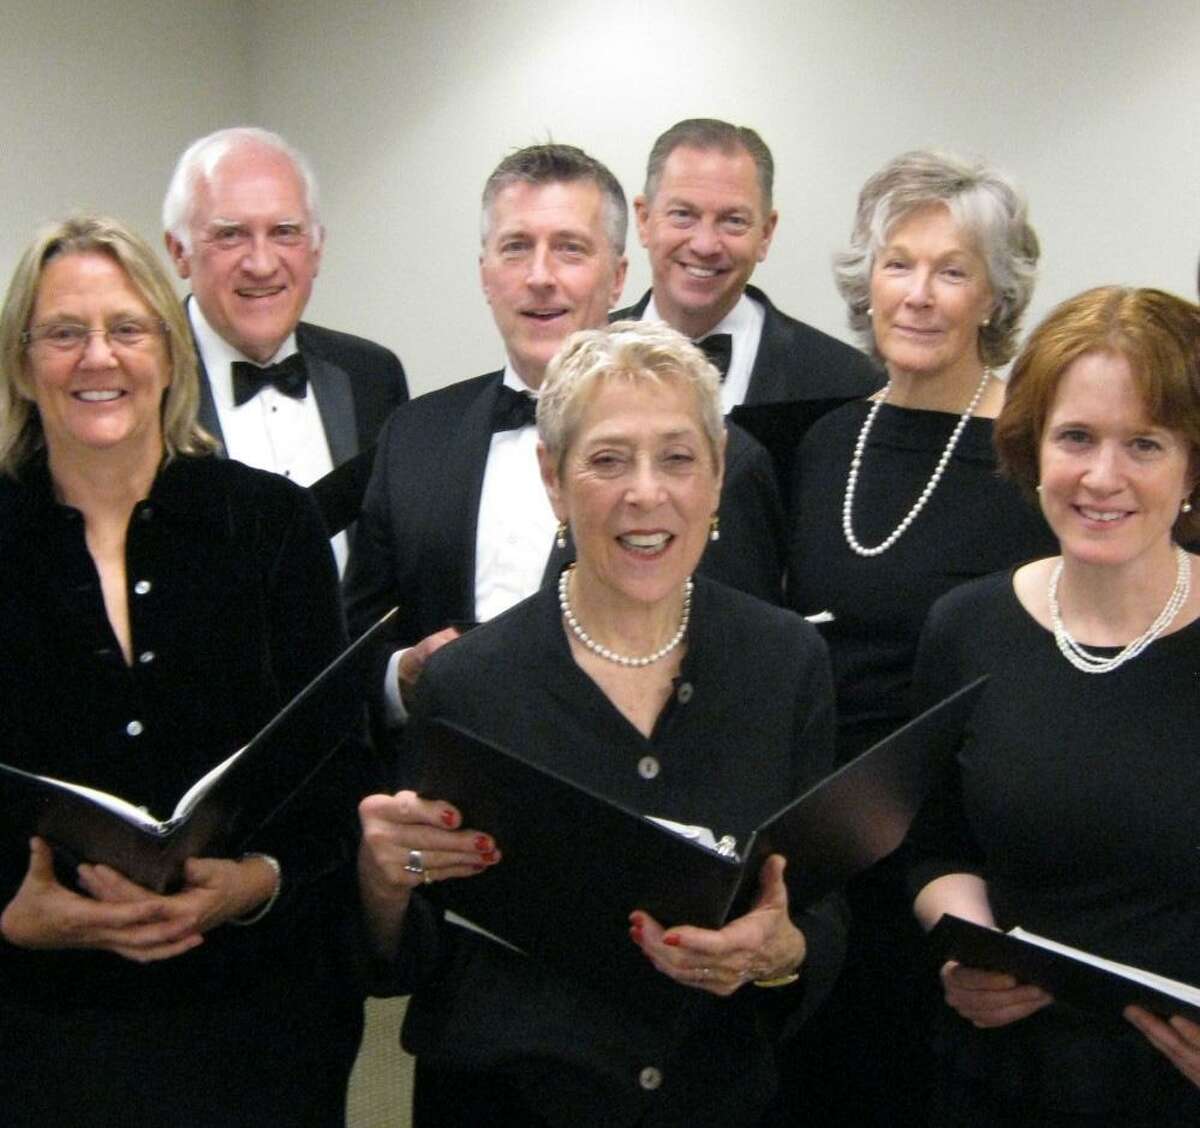 Members of the Greenwich Choral Society prepare for this weekend’s performance for the Curiosity Concert series at the Greenwich Library.